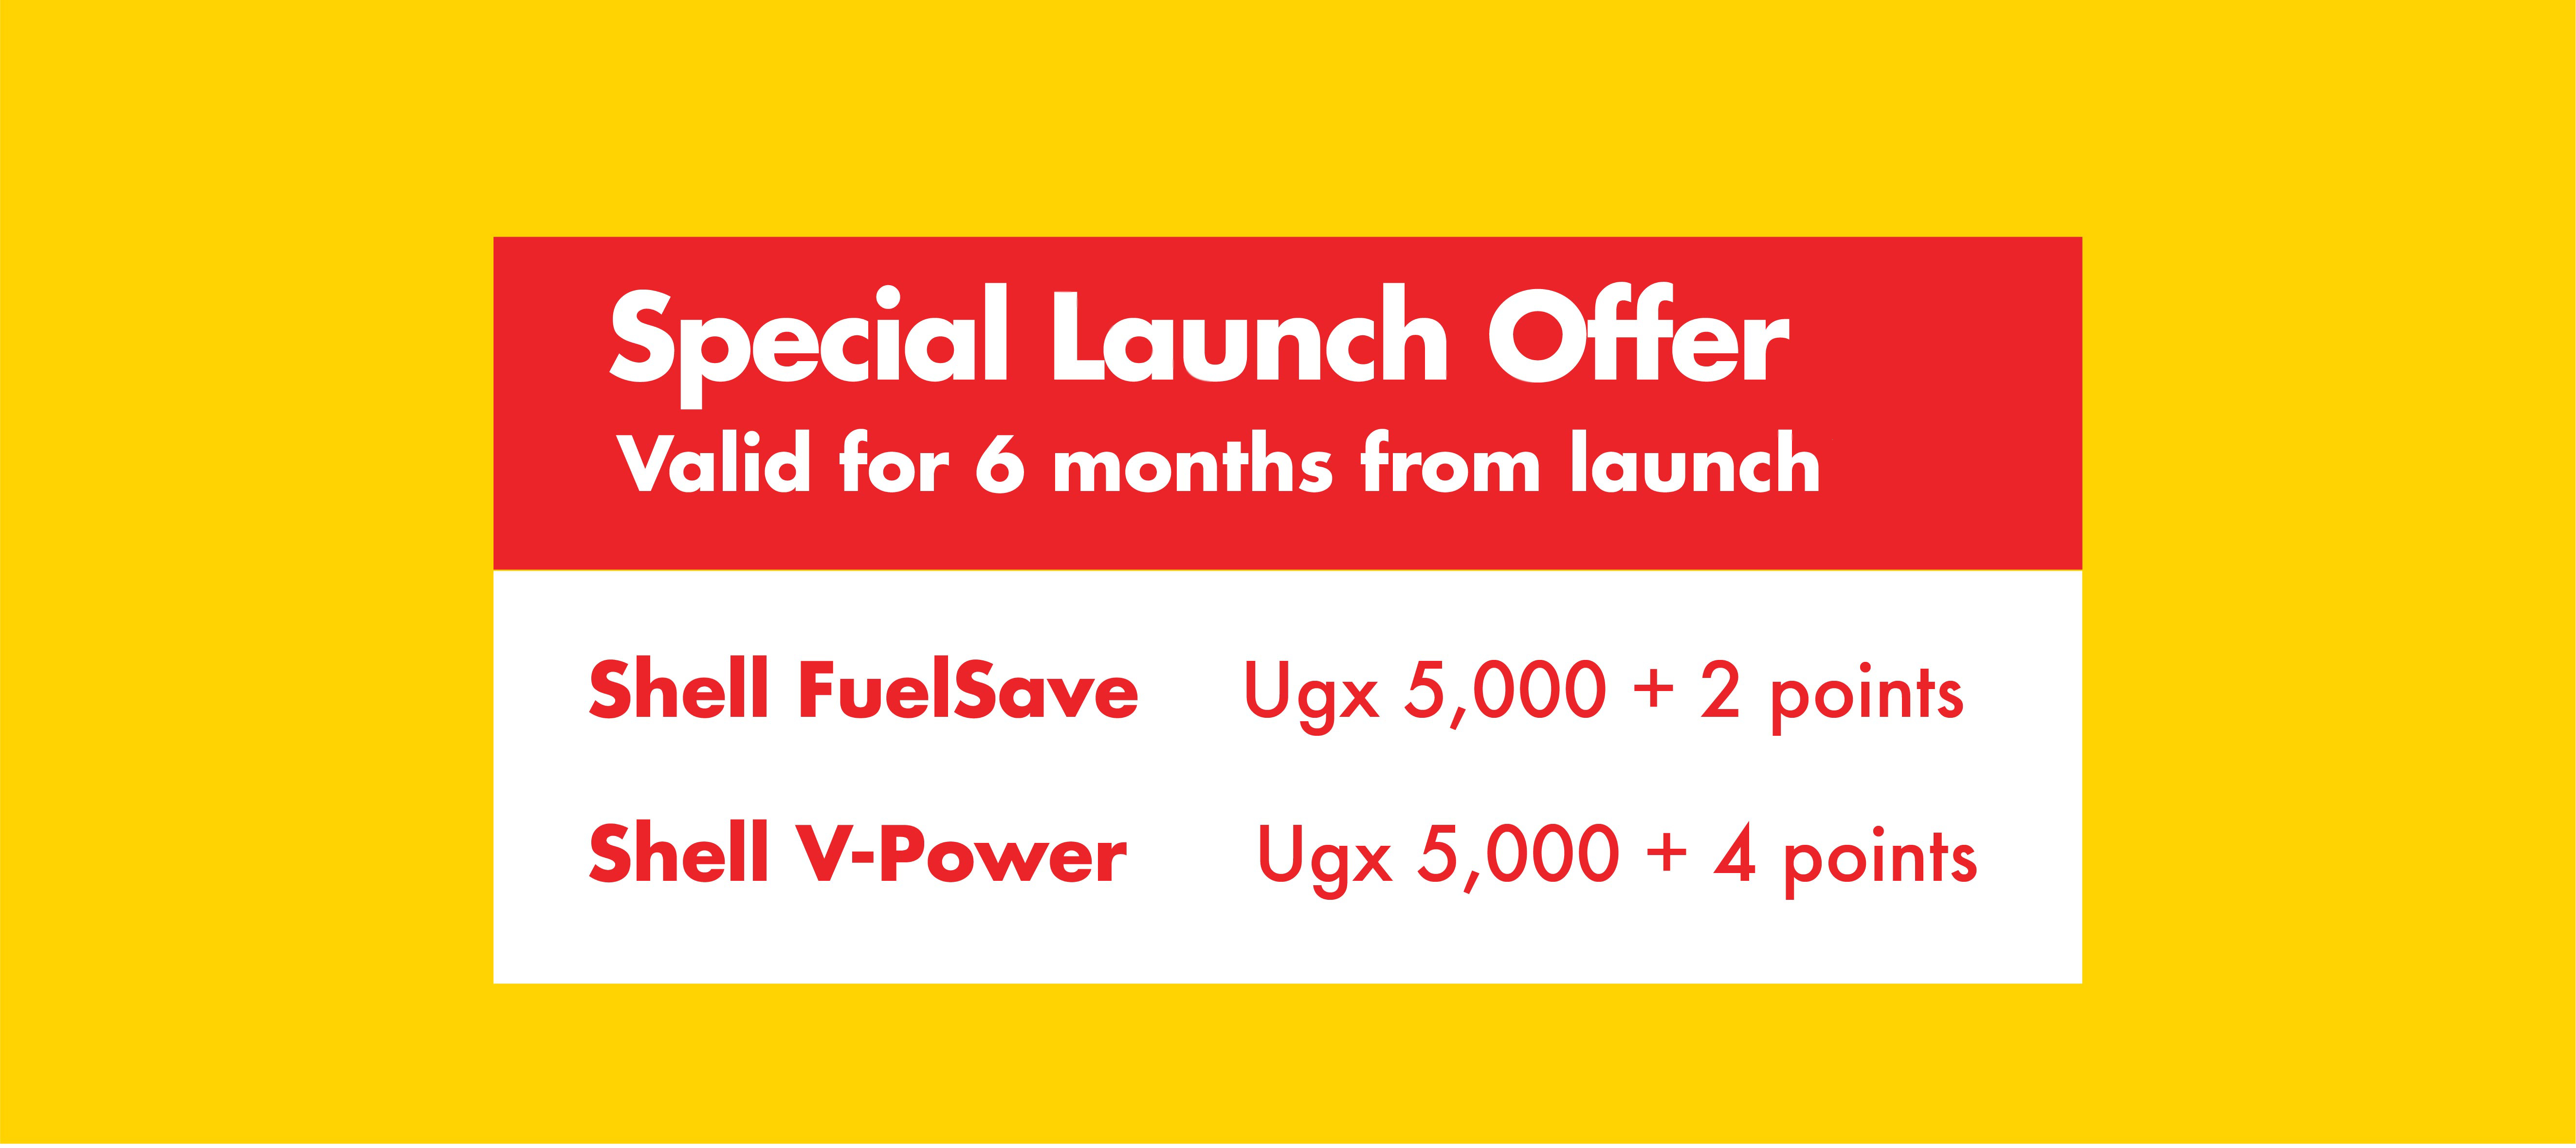 Special Launch Offer